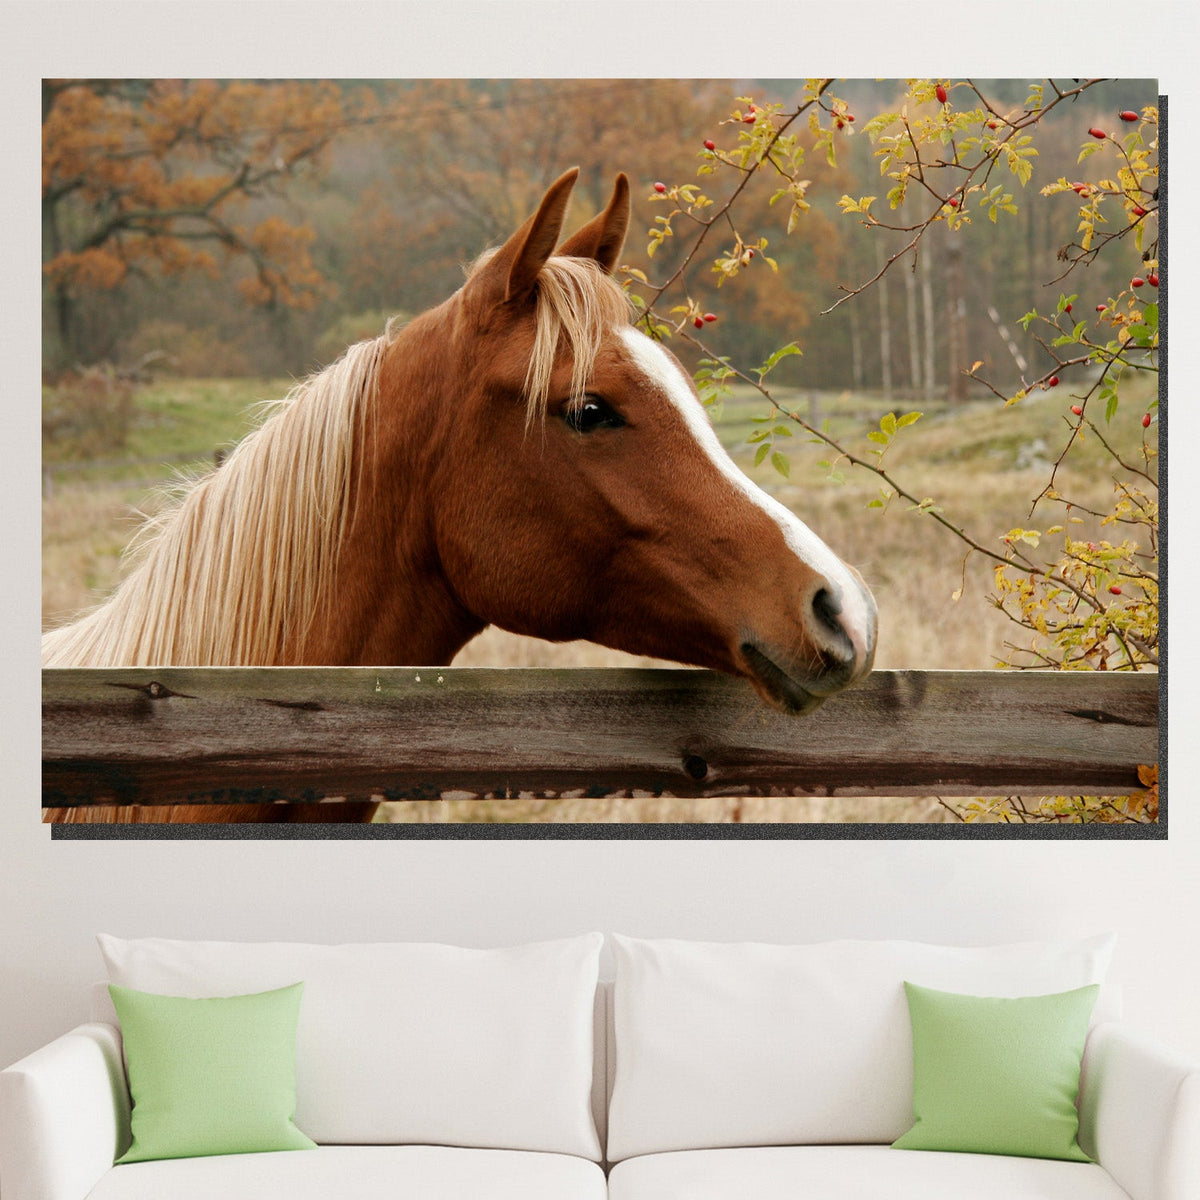 https://cdn.shopify.com/s/files/1/0387/9986/8044/products/CountryHorseCanvasArtprintStretched-2.jpg